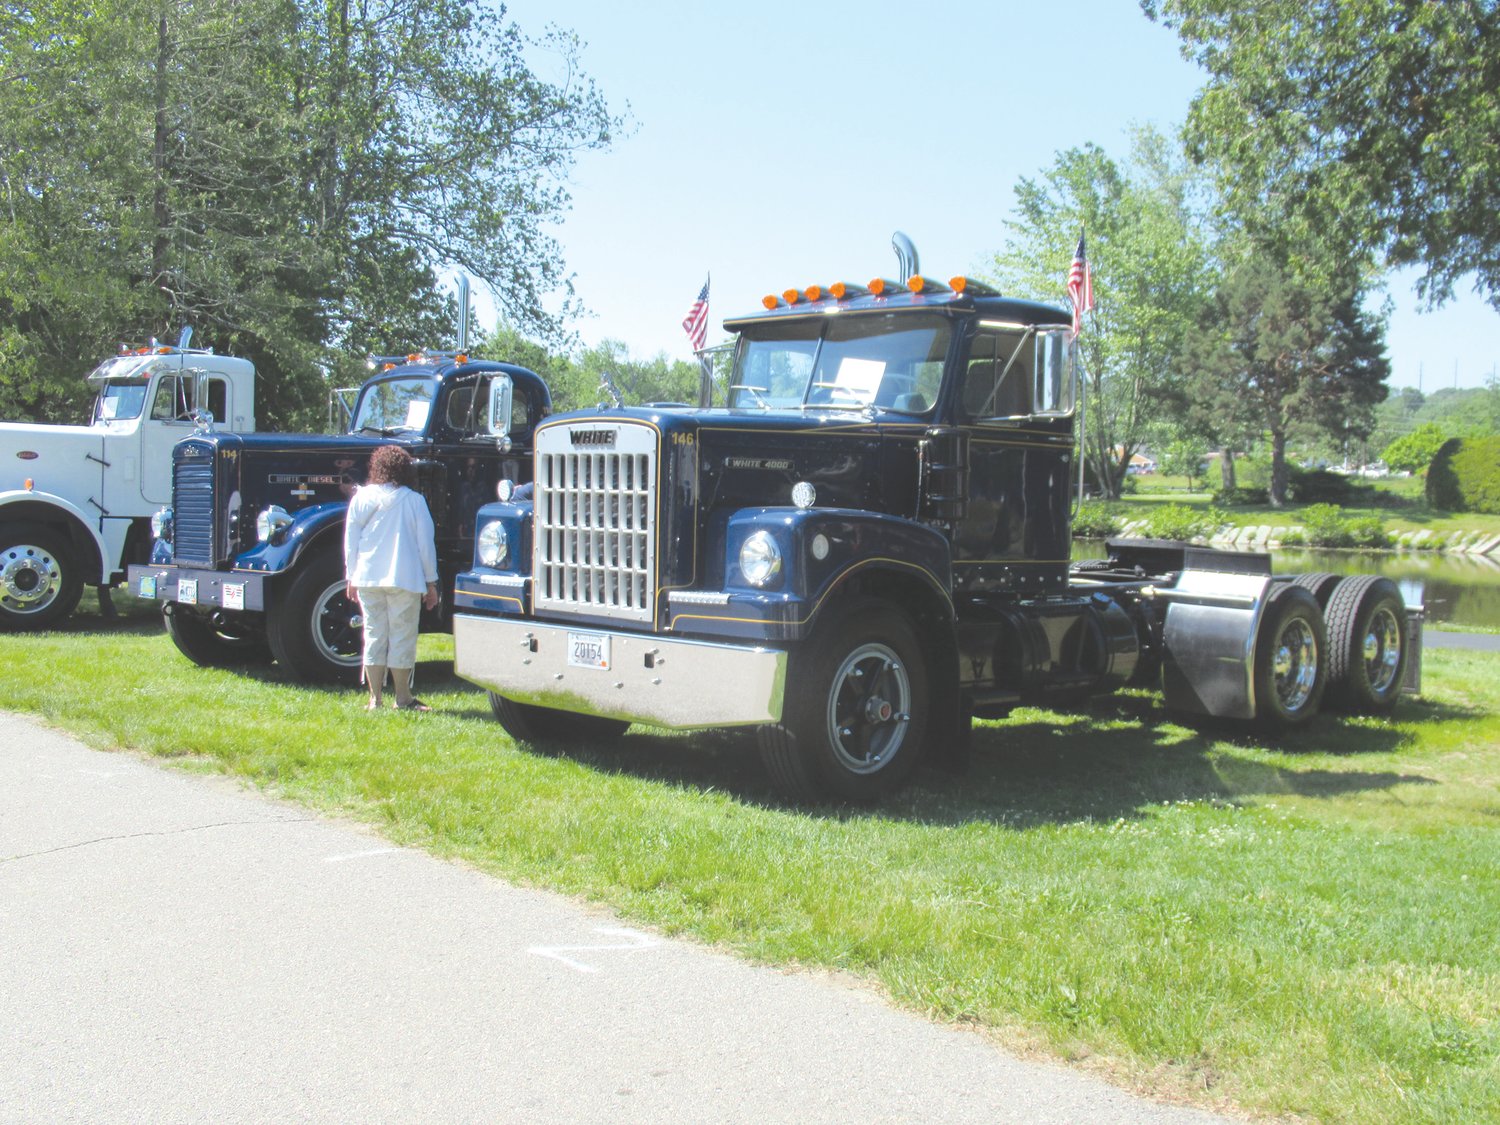 VINTAGE VEHICLE: Old-time heavy trucks that were used for many construction jobs will be on display Sunday at the Masonic Youth Center on Long Street in Warwick and admission is free.